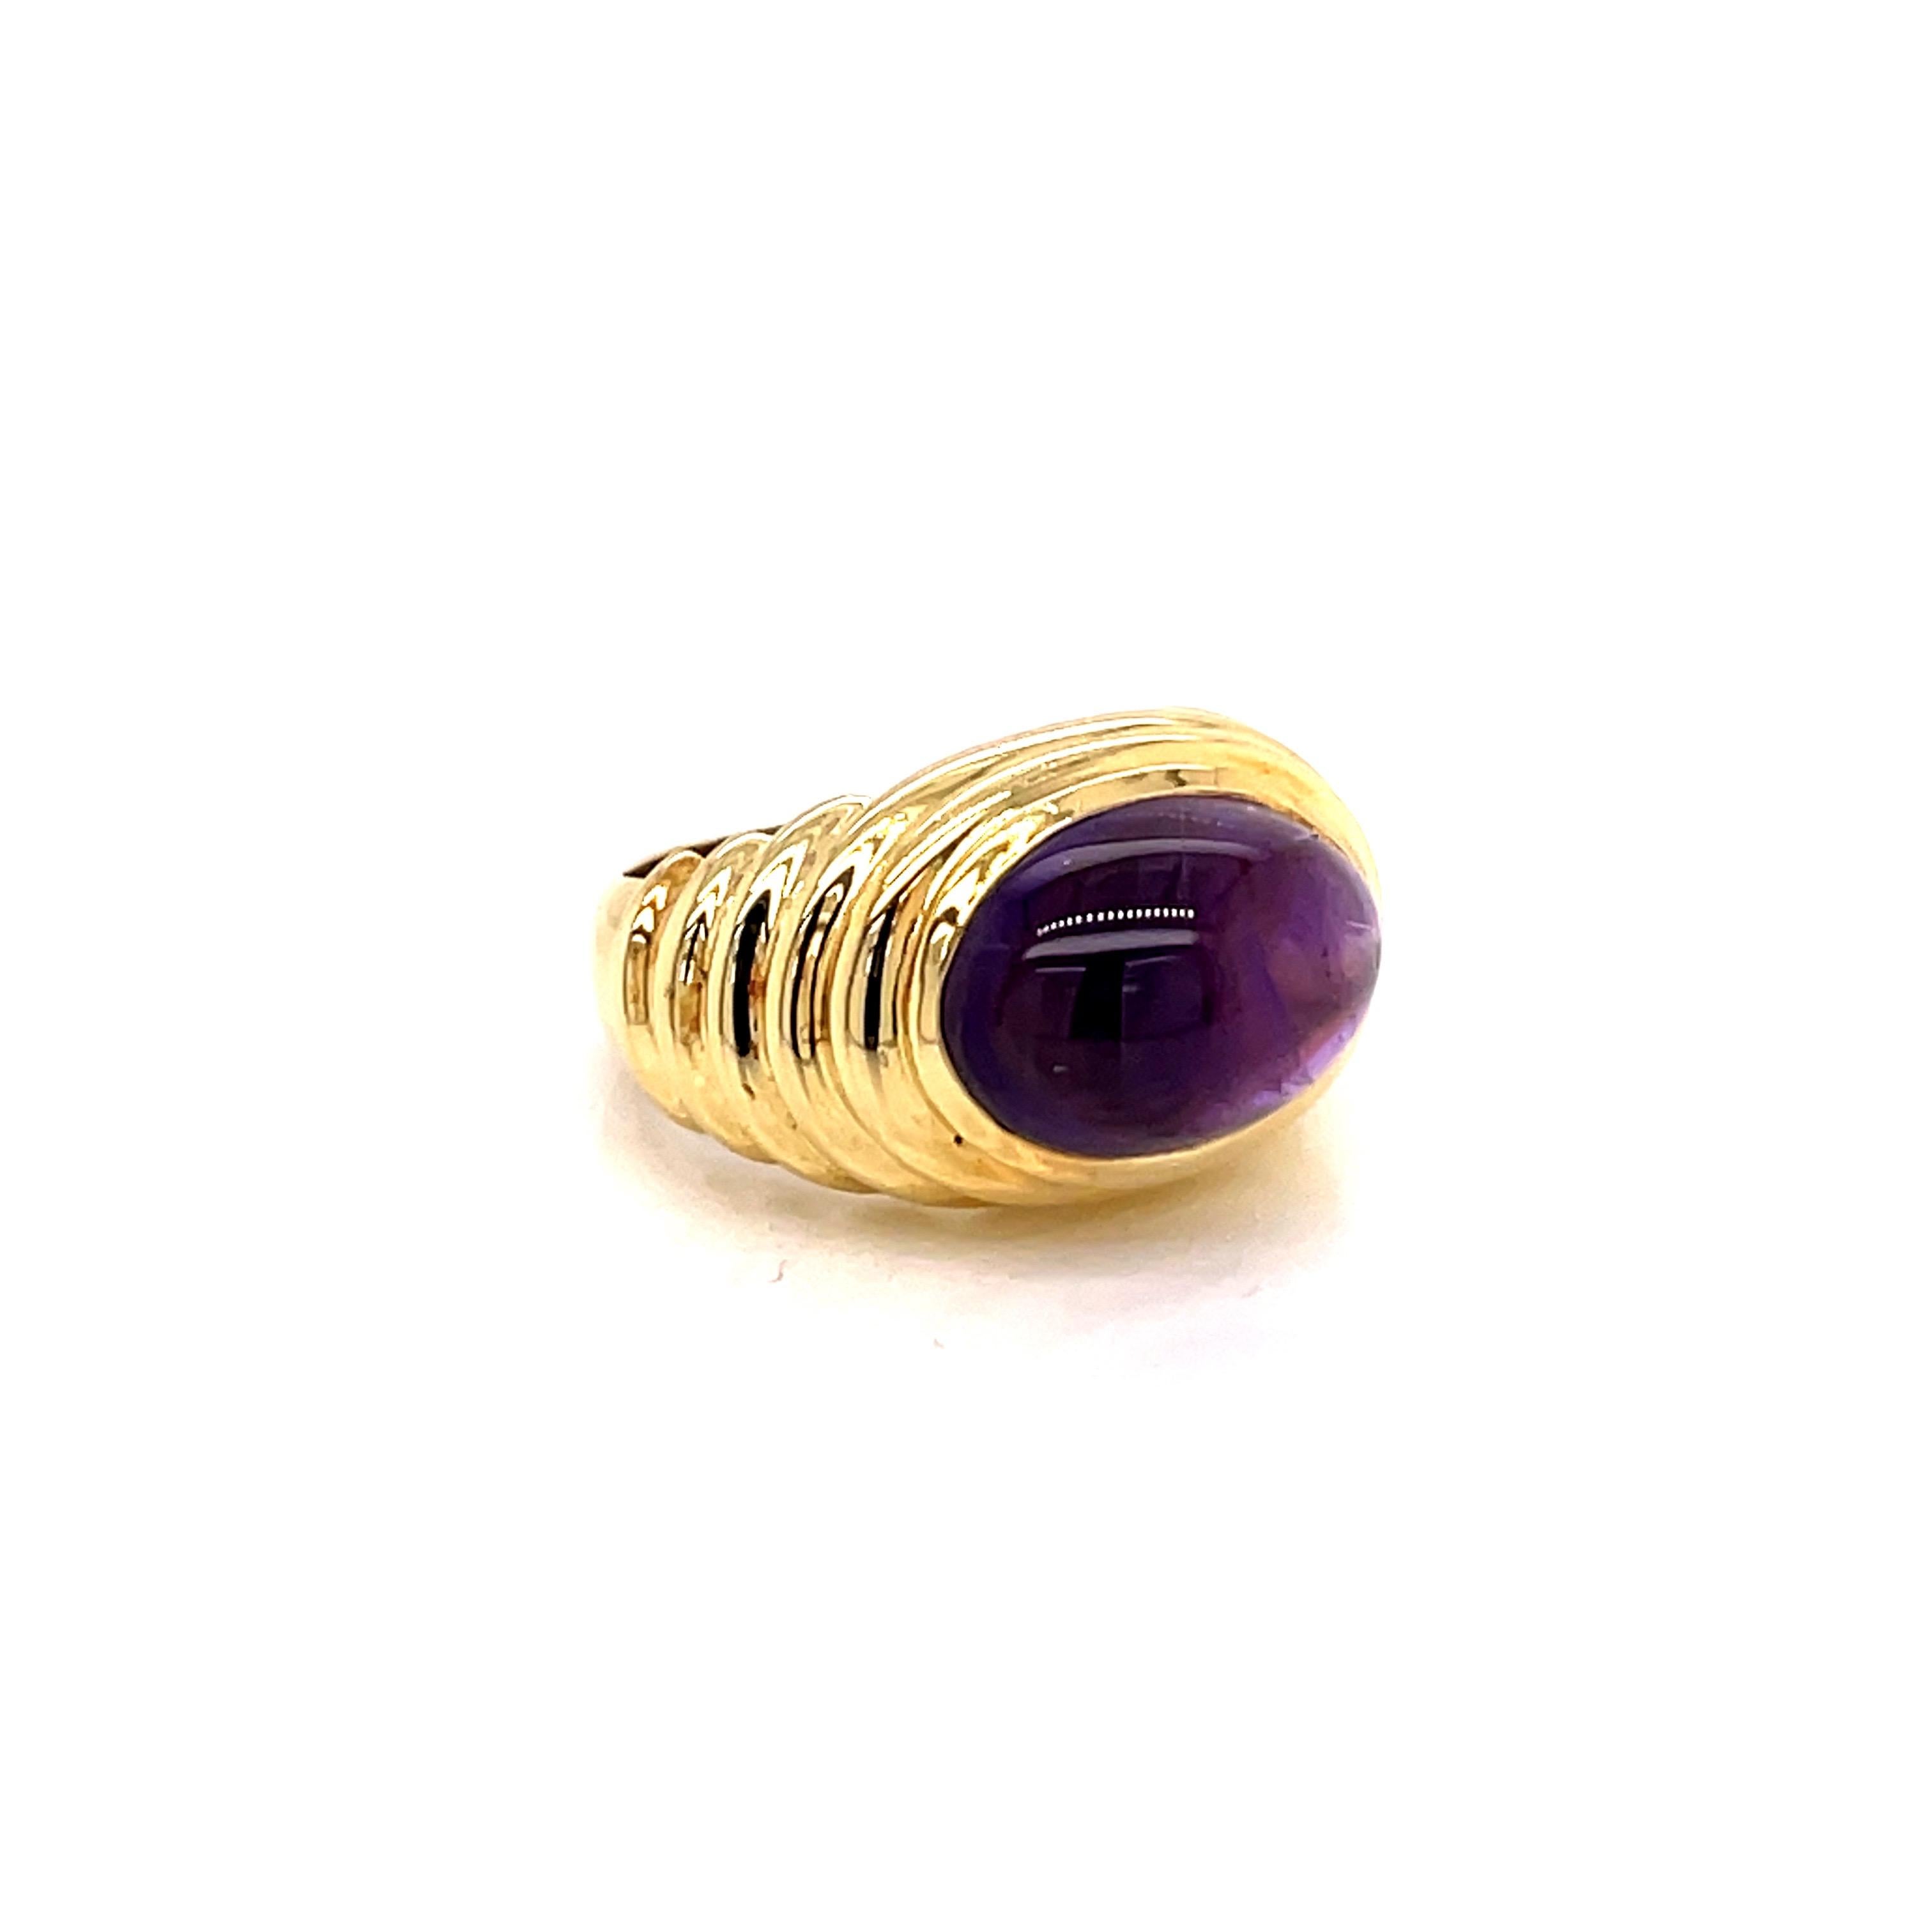 Vintage 1980's 5ct Oval Cabochon Amethyst Ring  - the amethyst weighs approximately 5ct and measures 13.5 x 9.5mm.   The setting is 18k yellow gold with a finger size 6 which can be sized upon request.  The ring weighs 10 grams